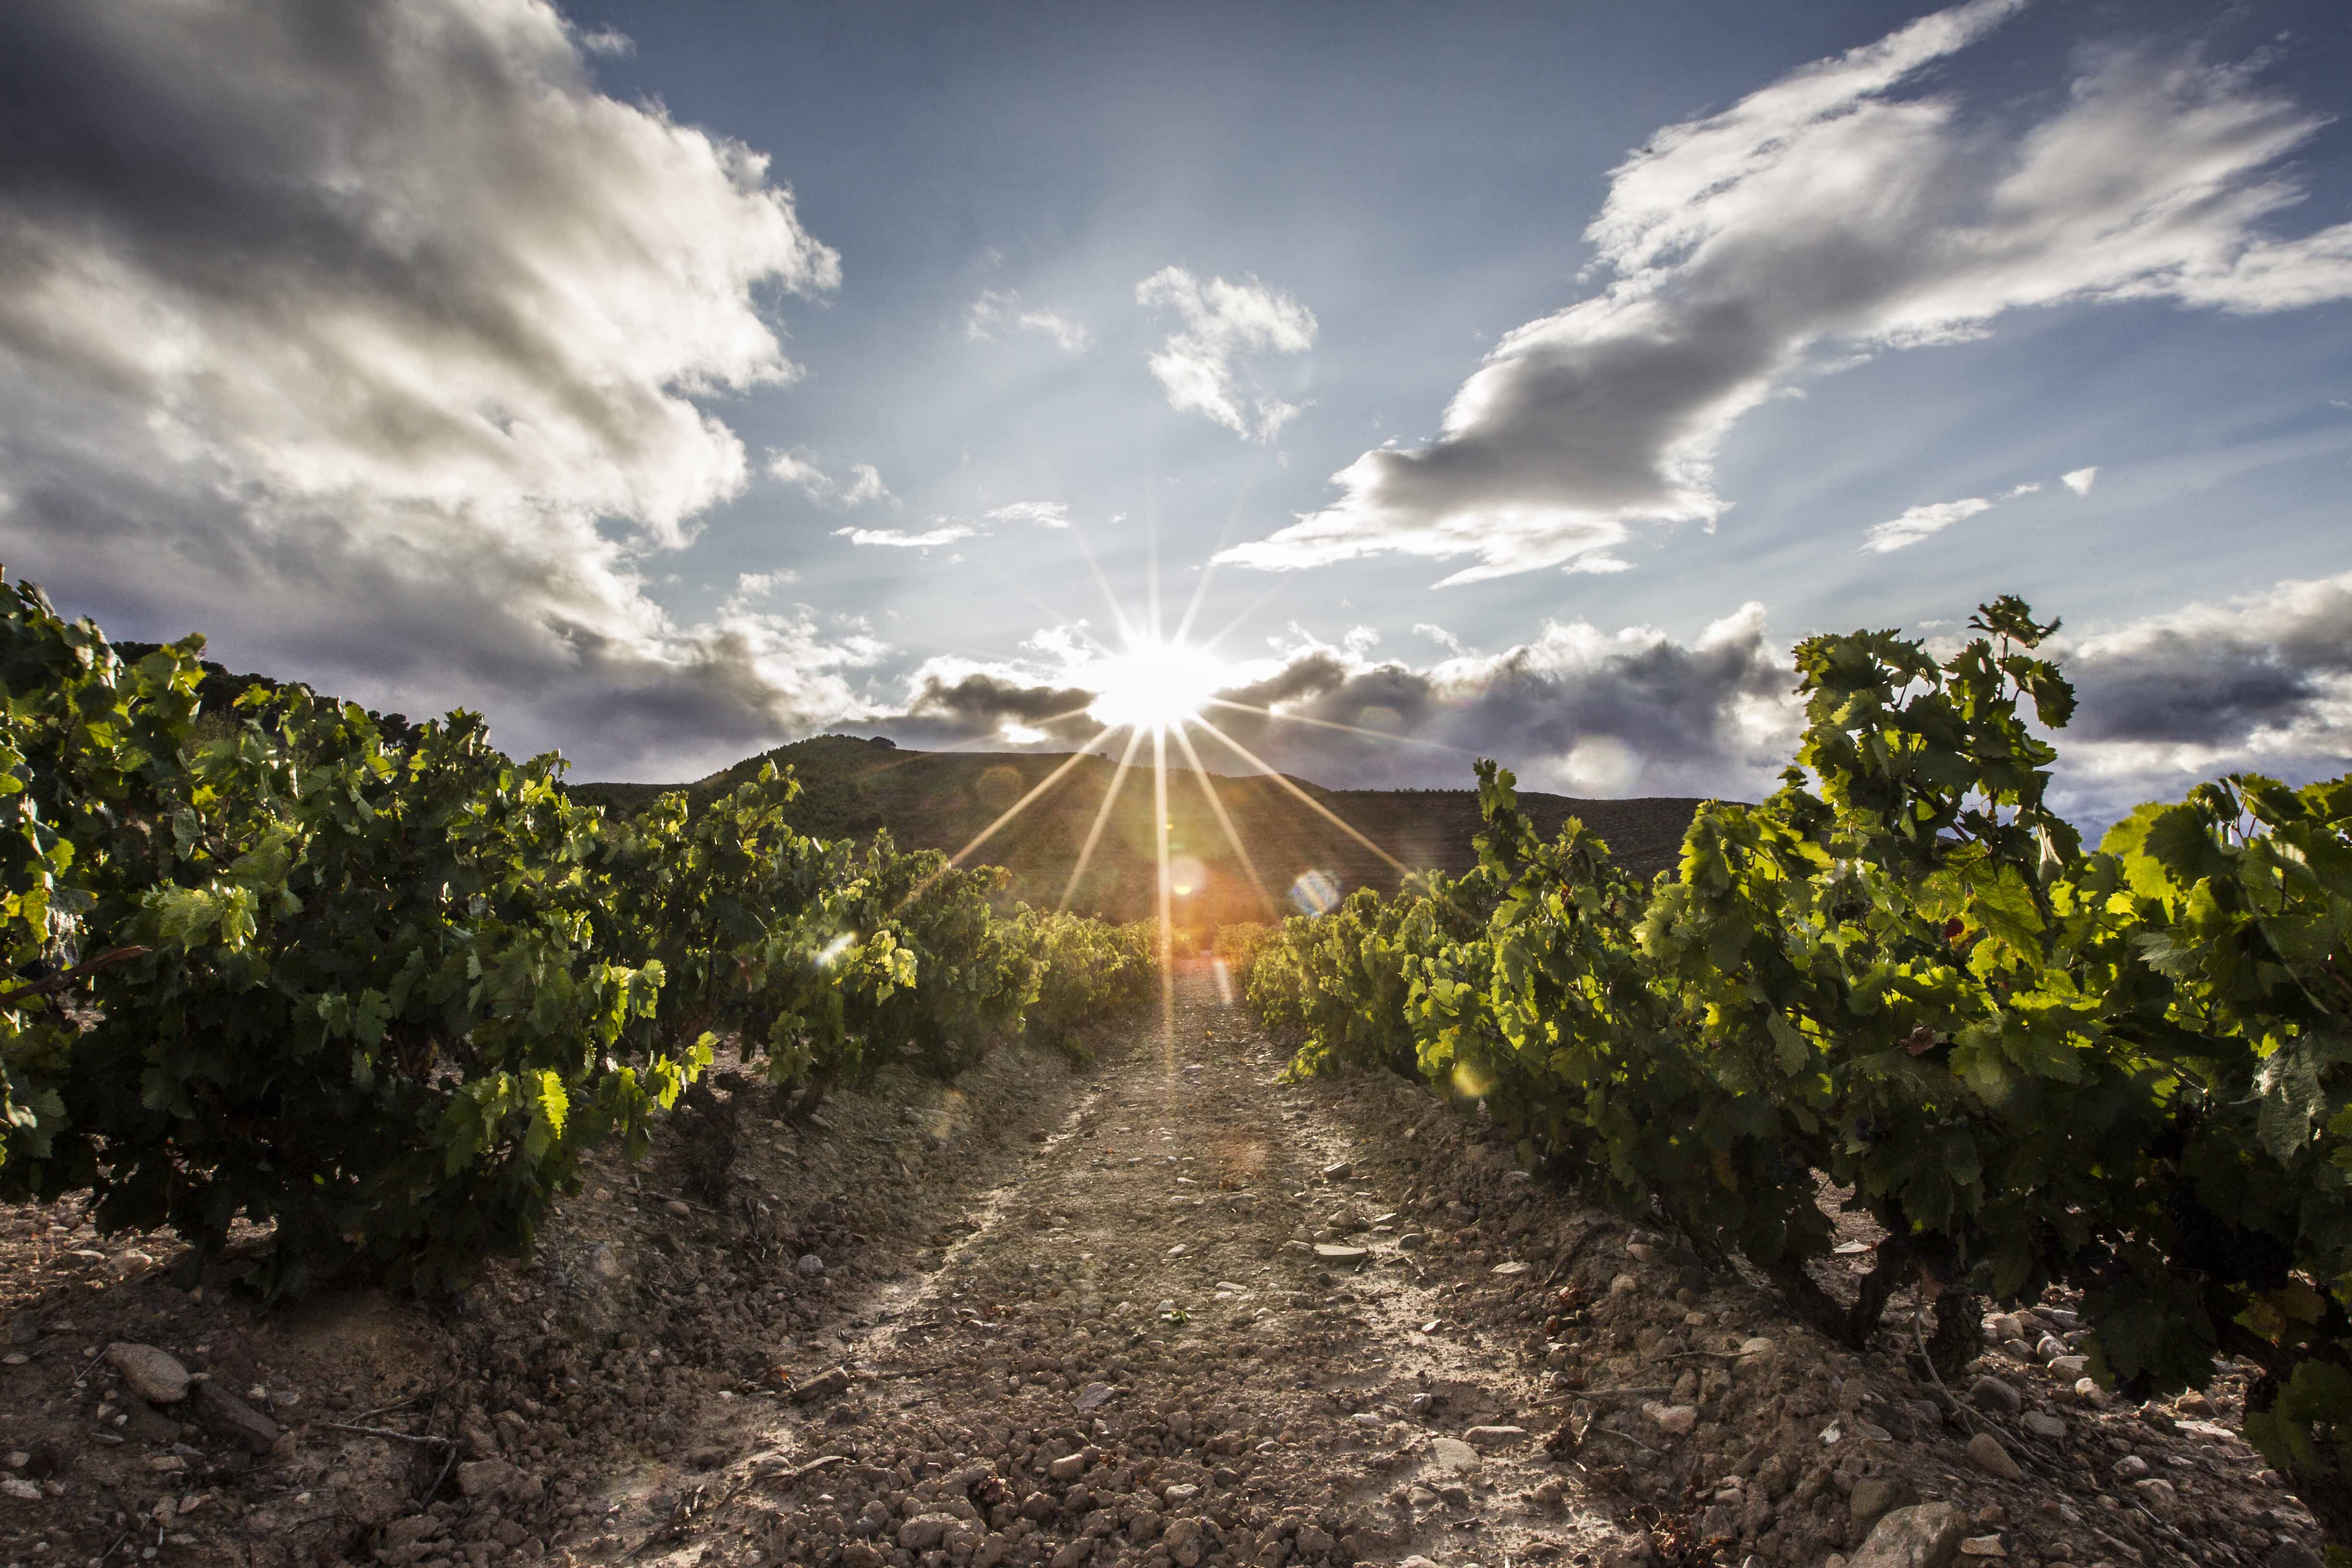 Report on an intense year of changes in the DOCa Rioja